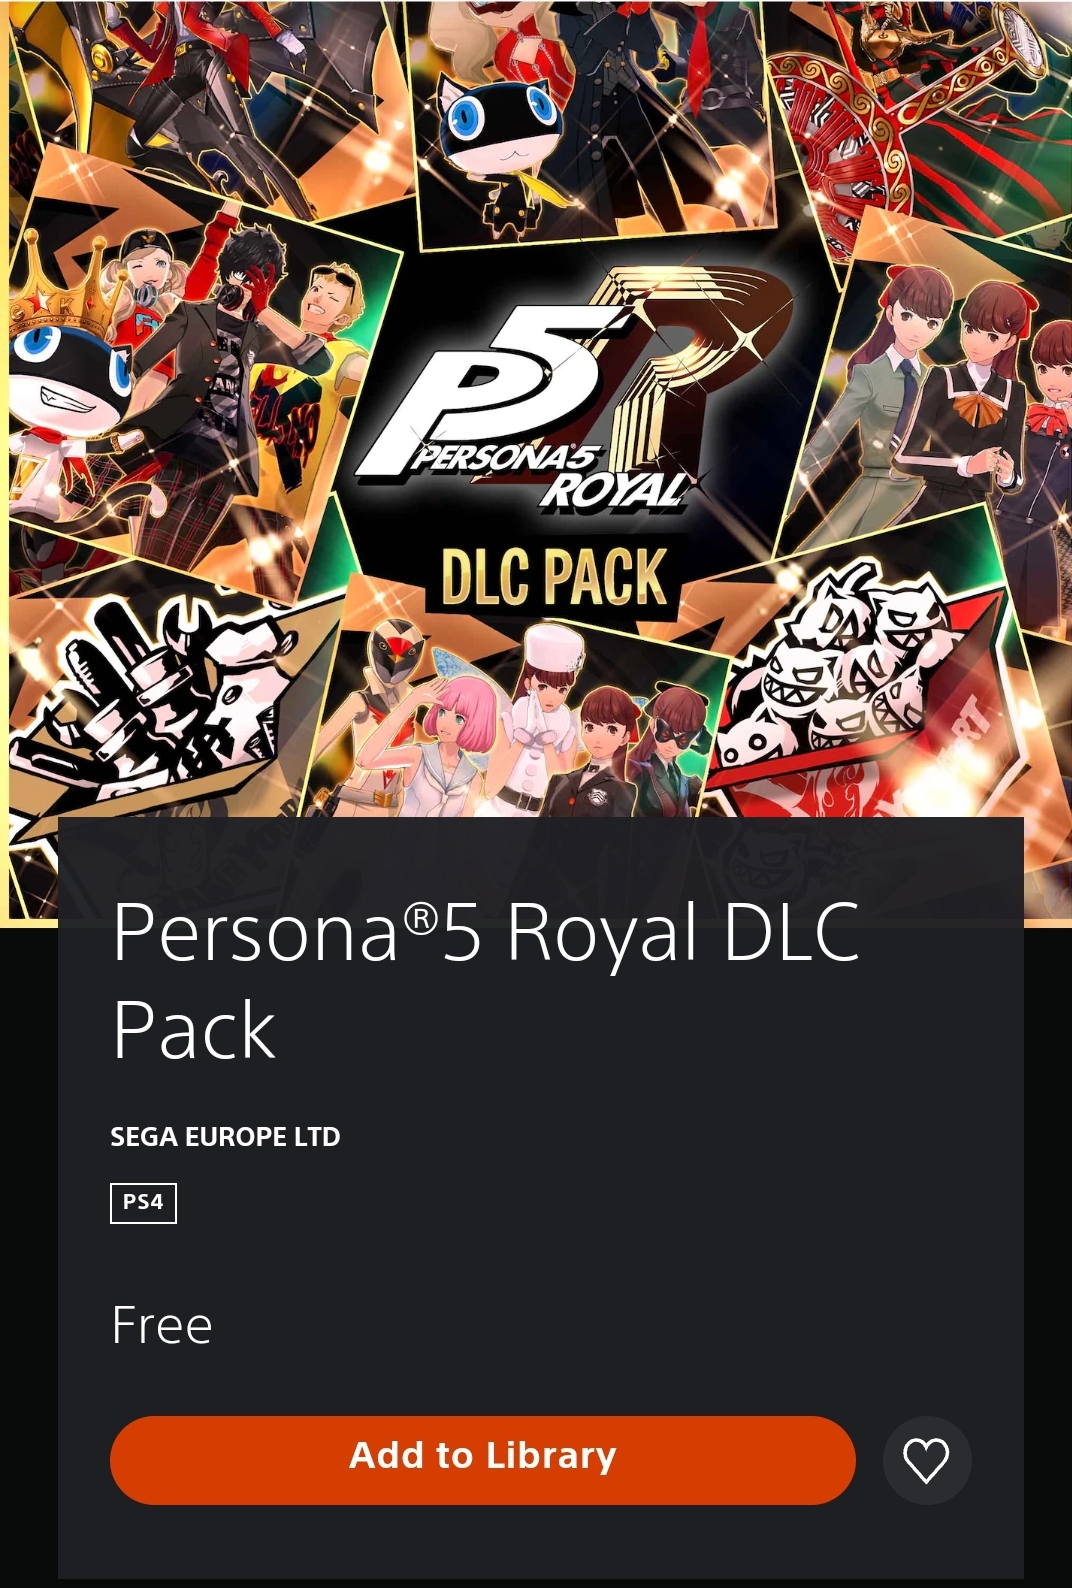 Persona 5 Royal DLC available for free on PlayStation Store.